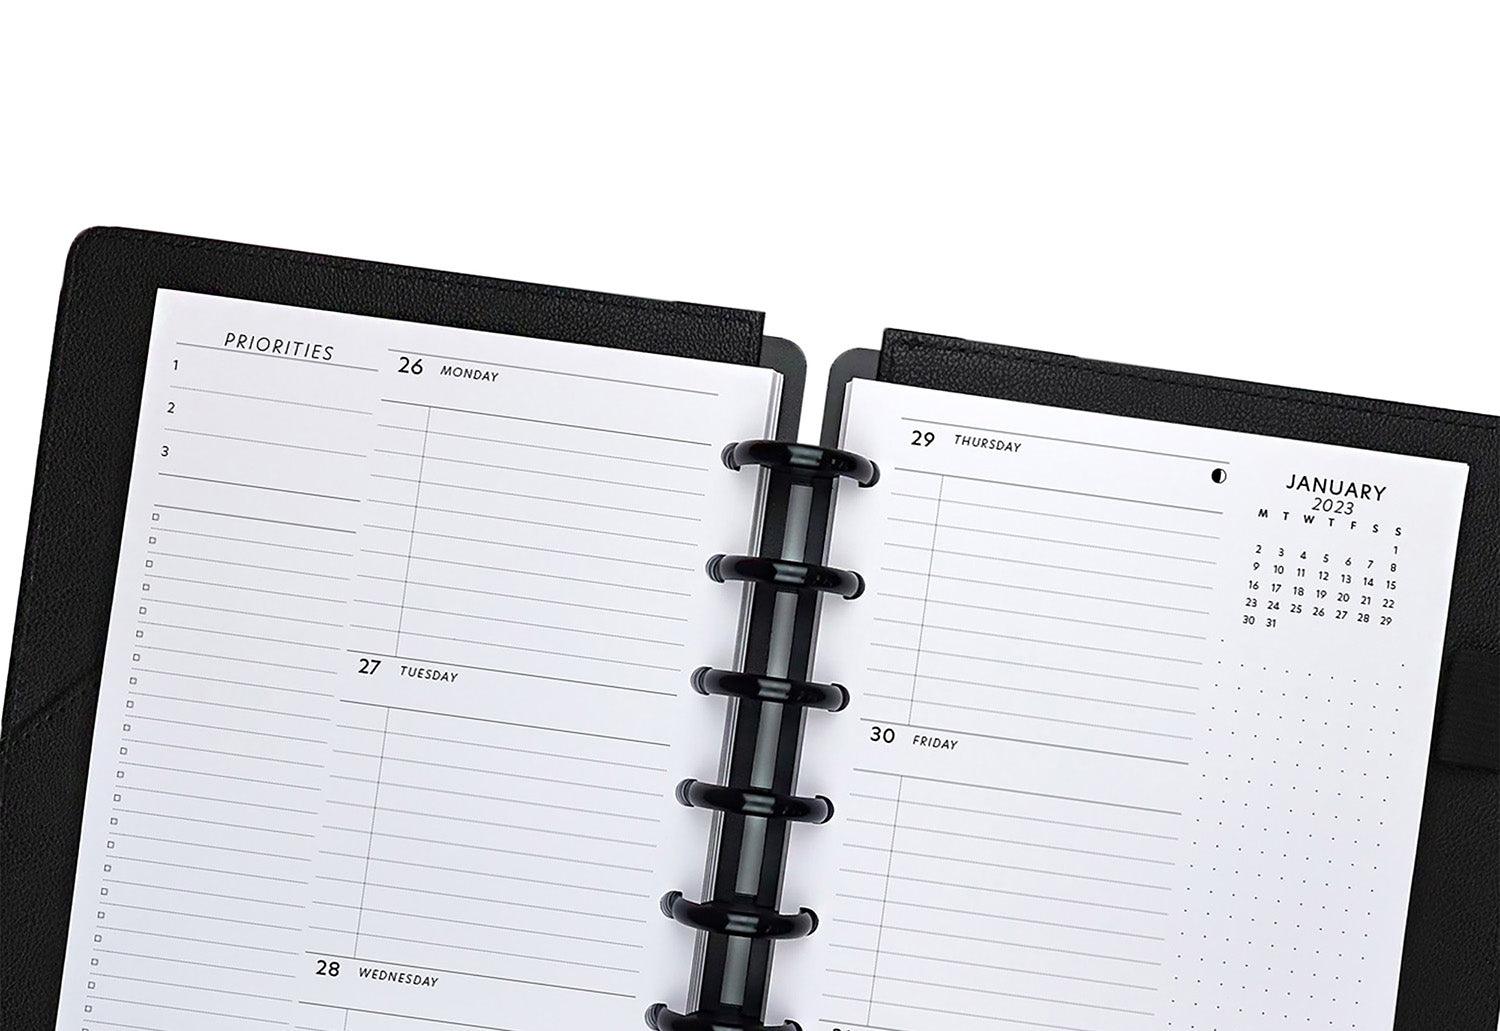 Weekly planner inserts and calendar pages for discbound planner sizes and A5 size ringbound planner binding systems by Jane's Agenda.